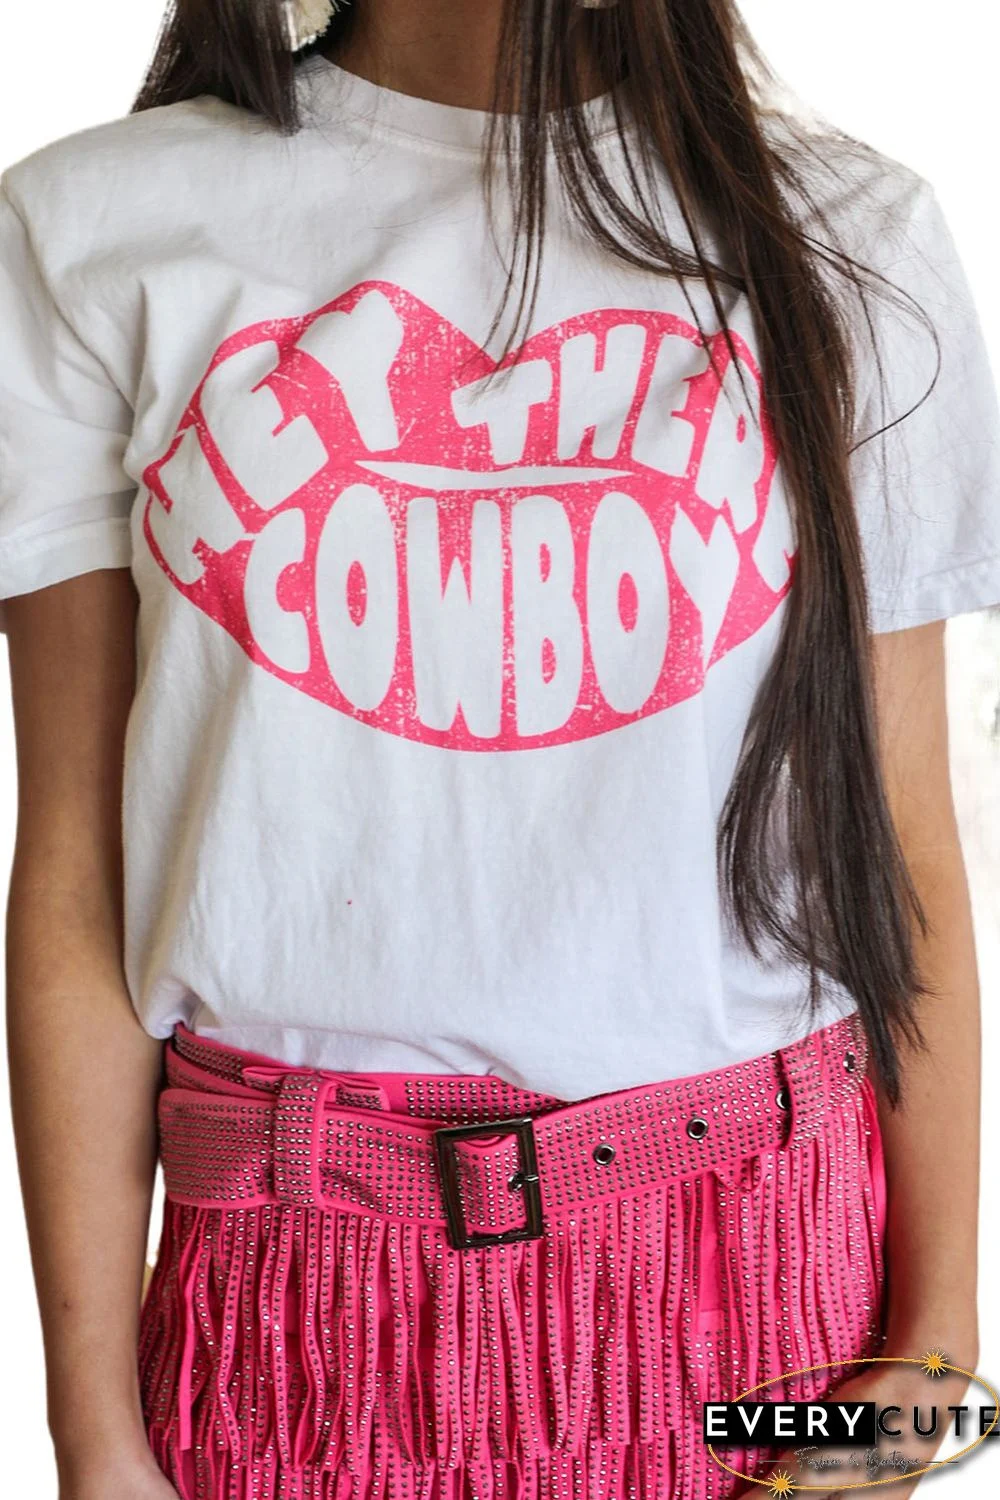 White Round Neck HEY THERE COWBOY Graphic Tee